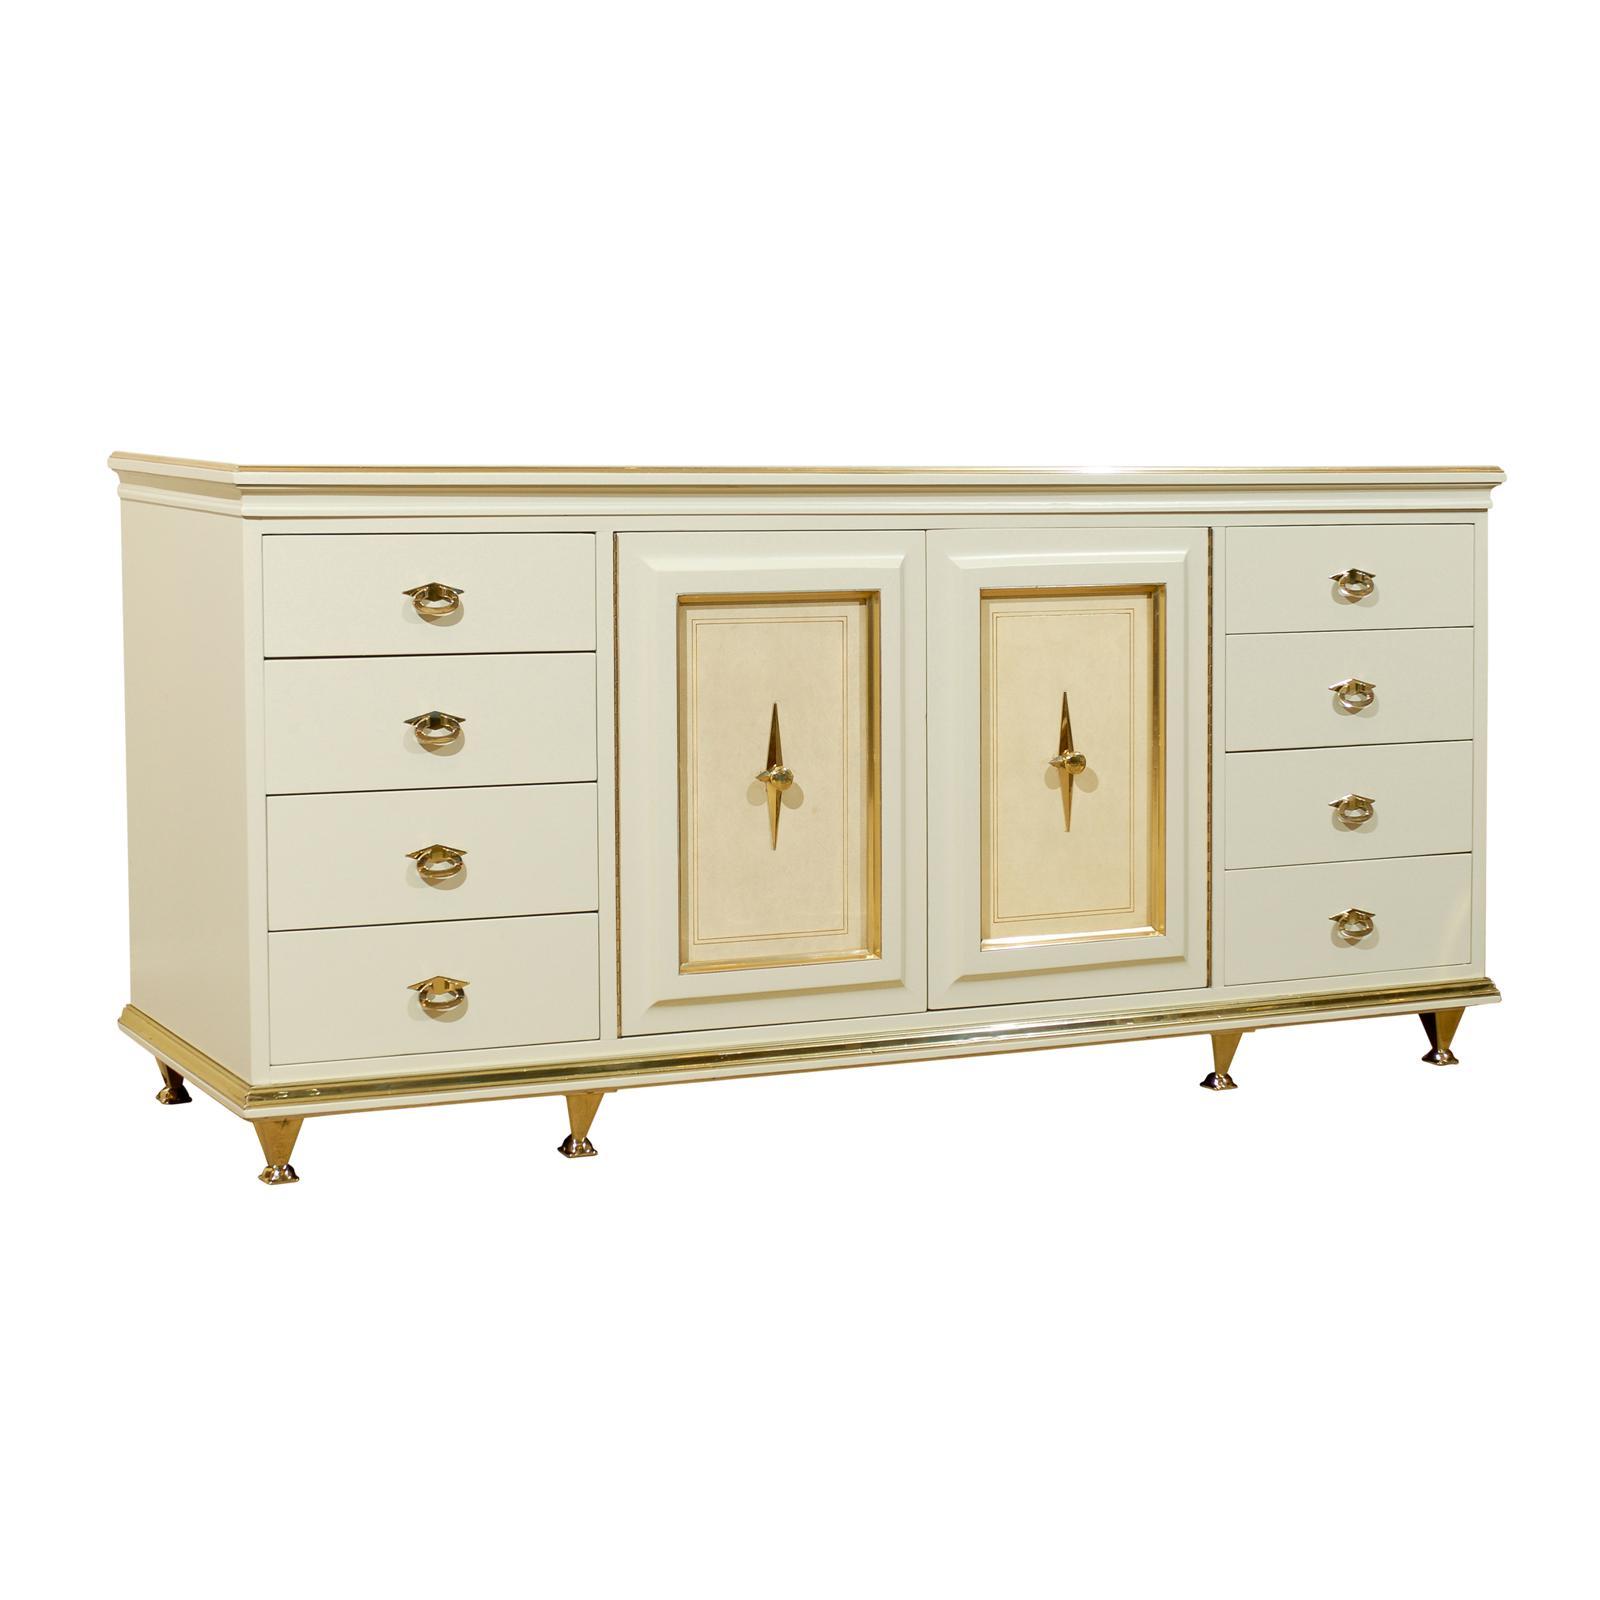 A Remarkable Chest/ Buffet/Credenza by American of Martinsville in Cream Lacquer